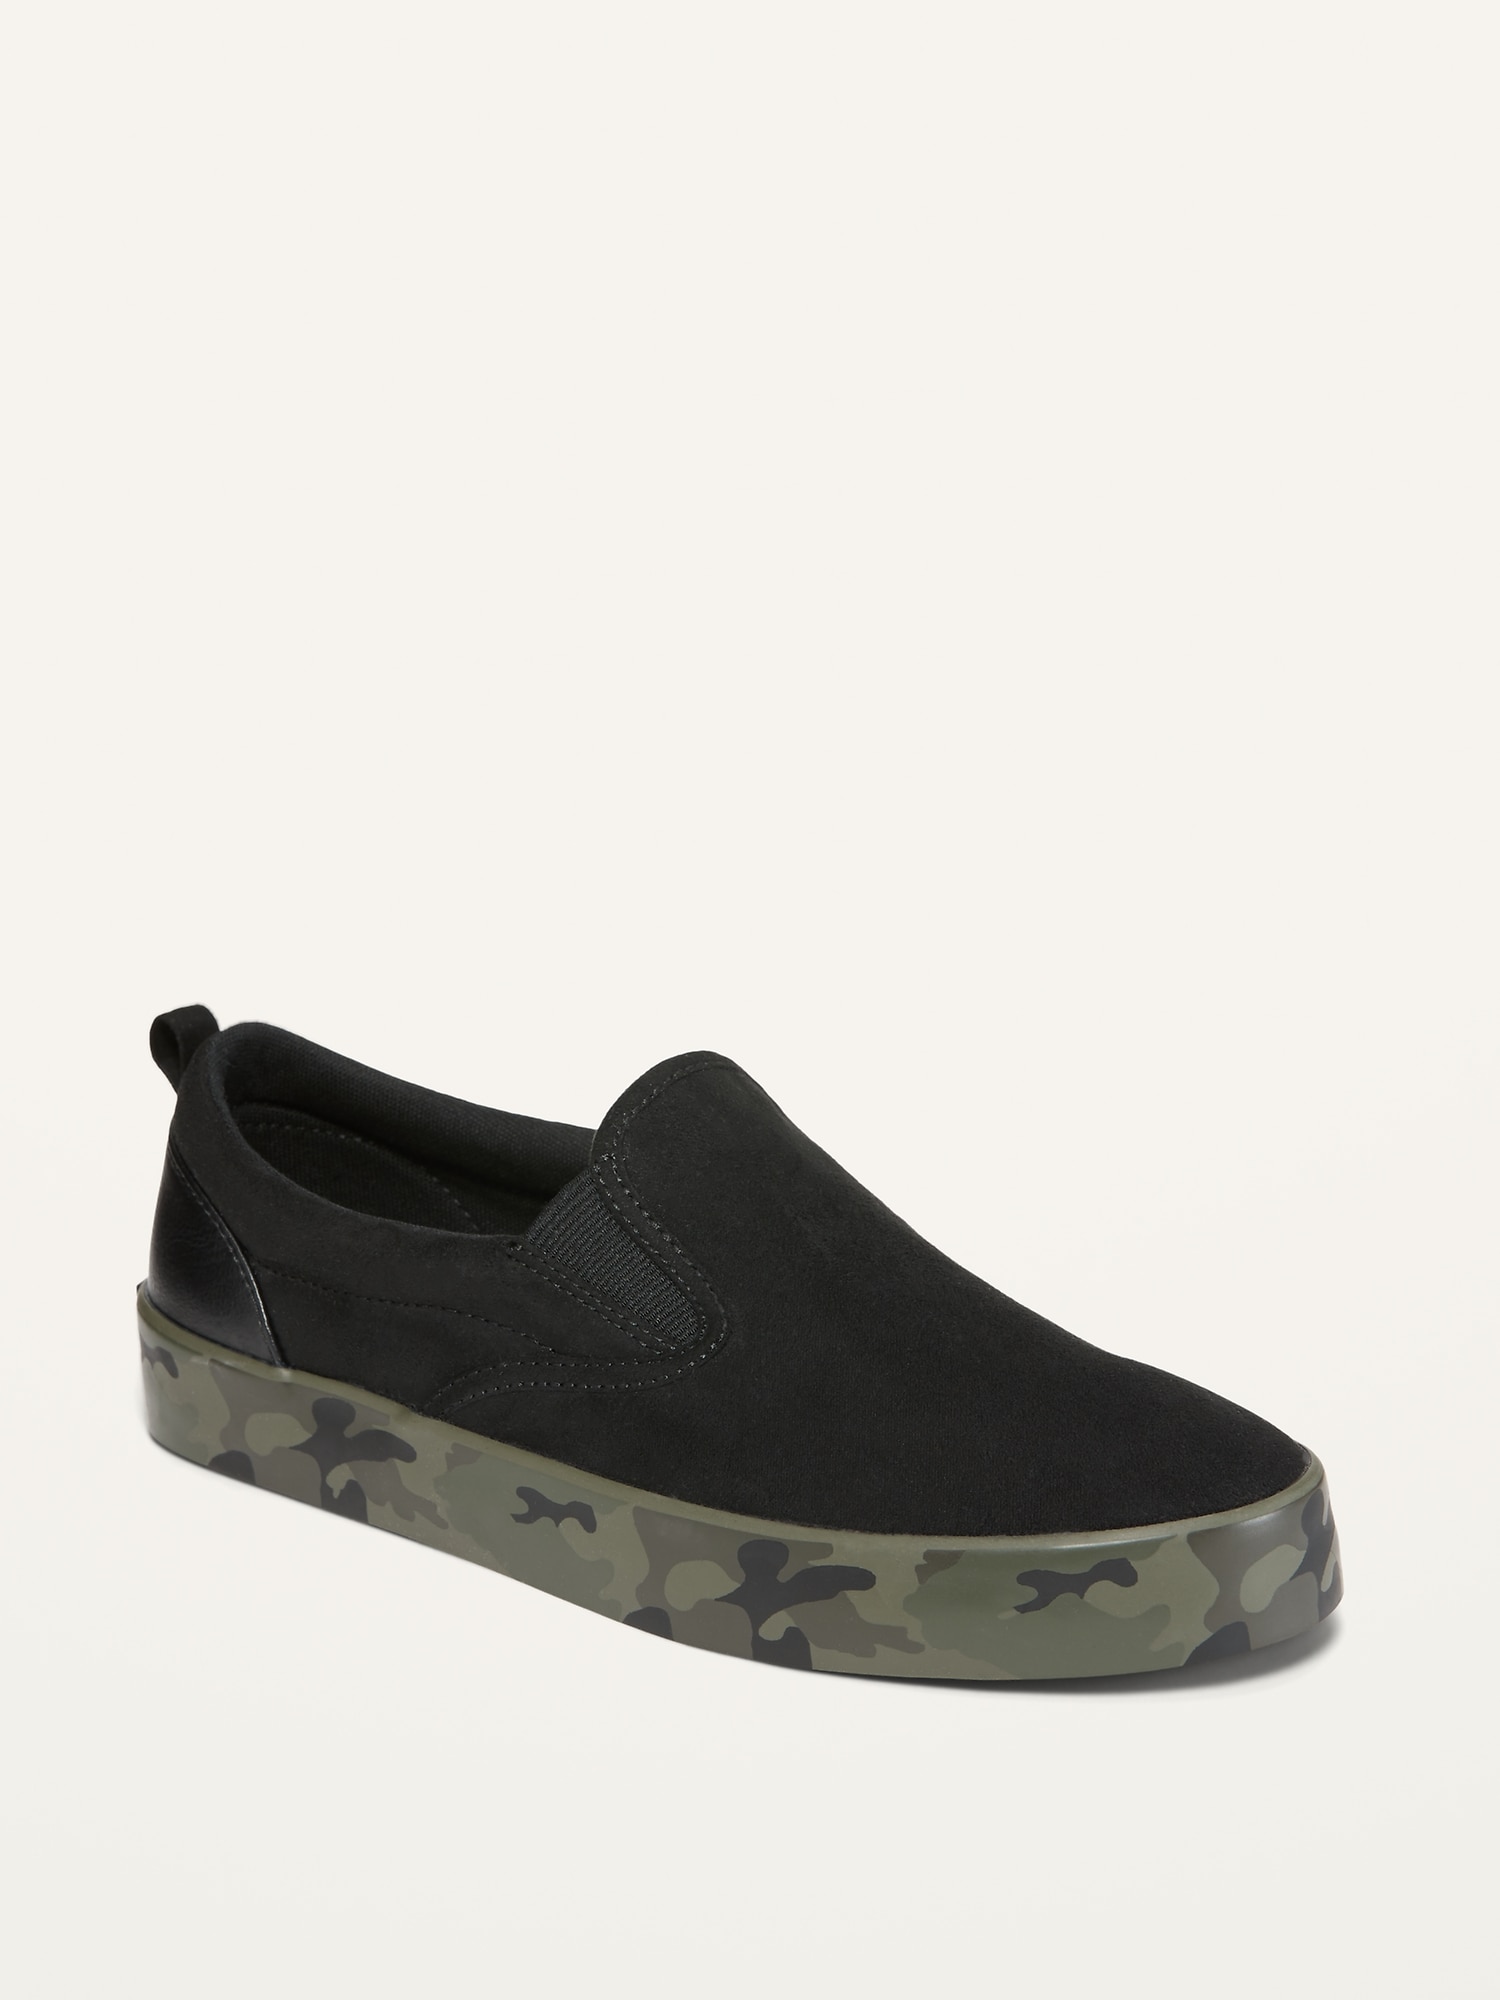 old navy boys slip on shoes